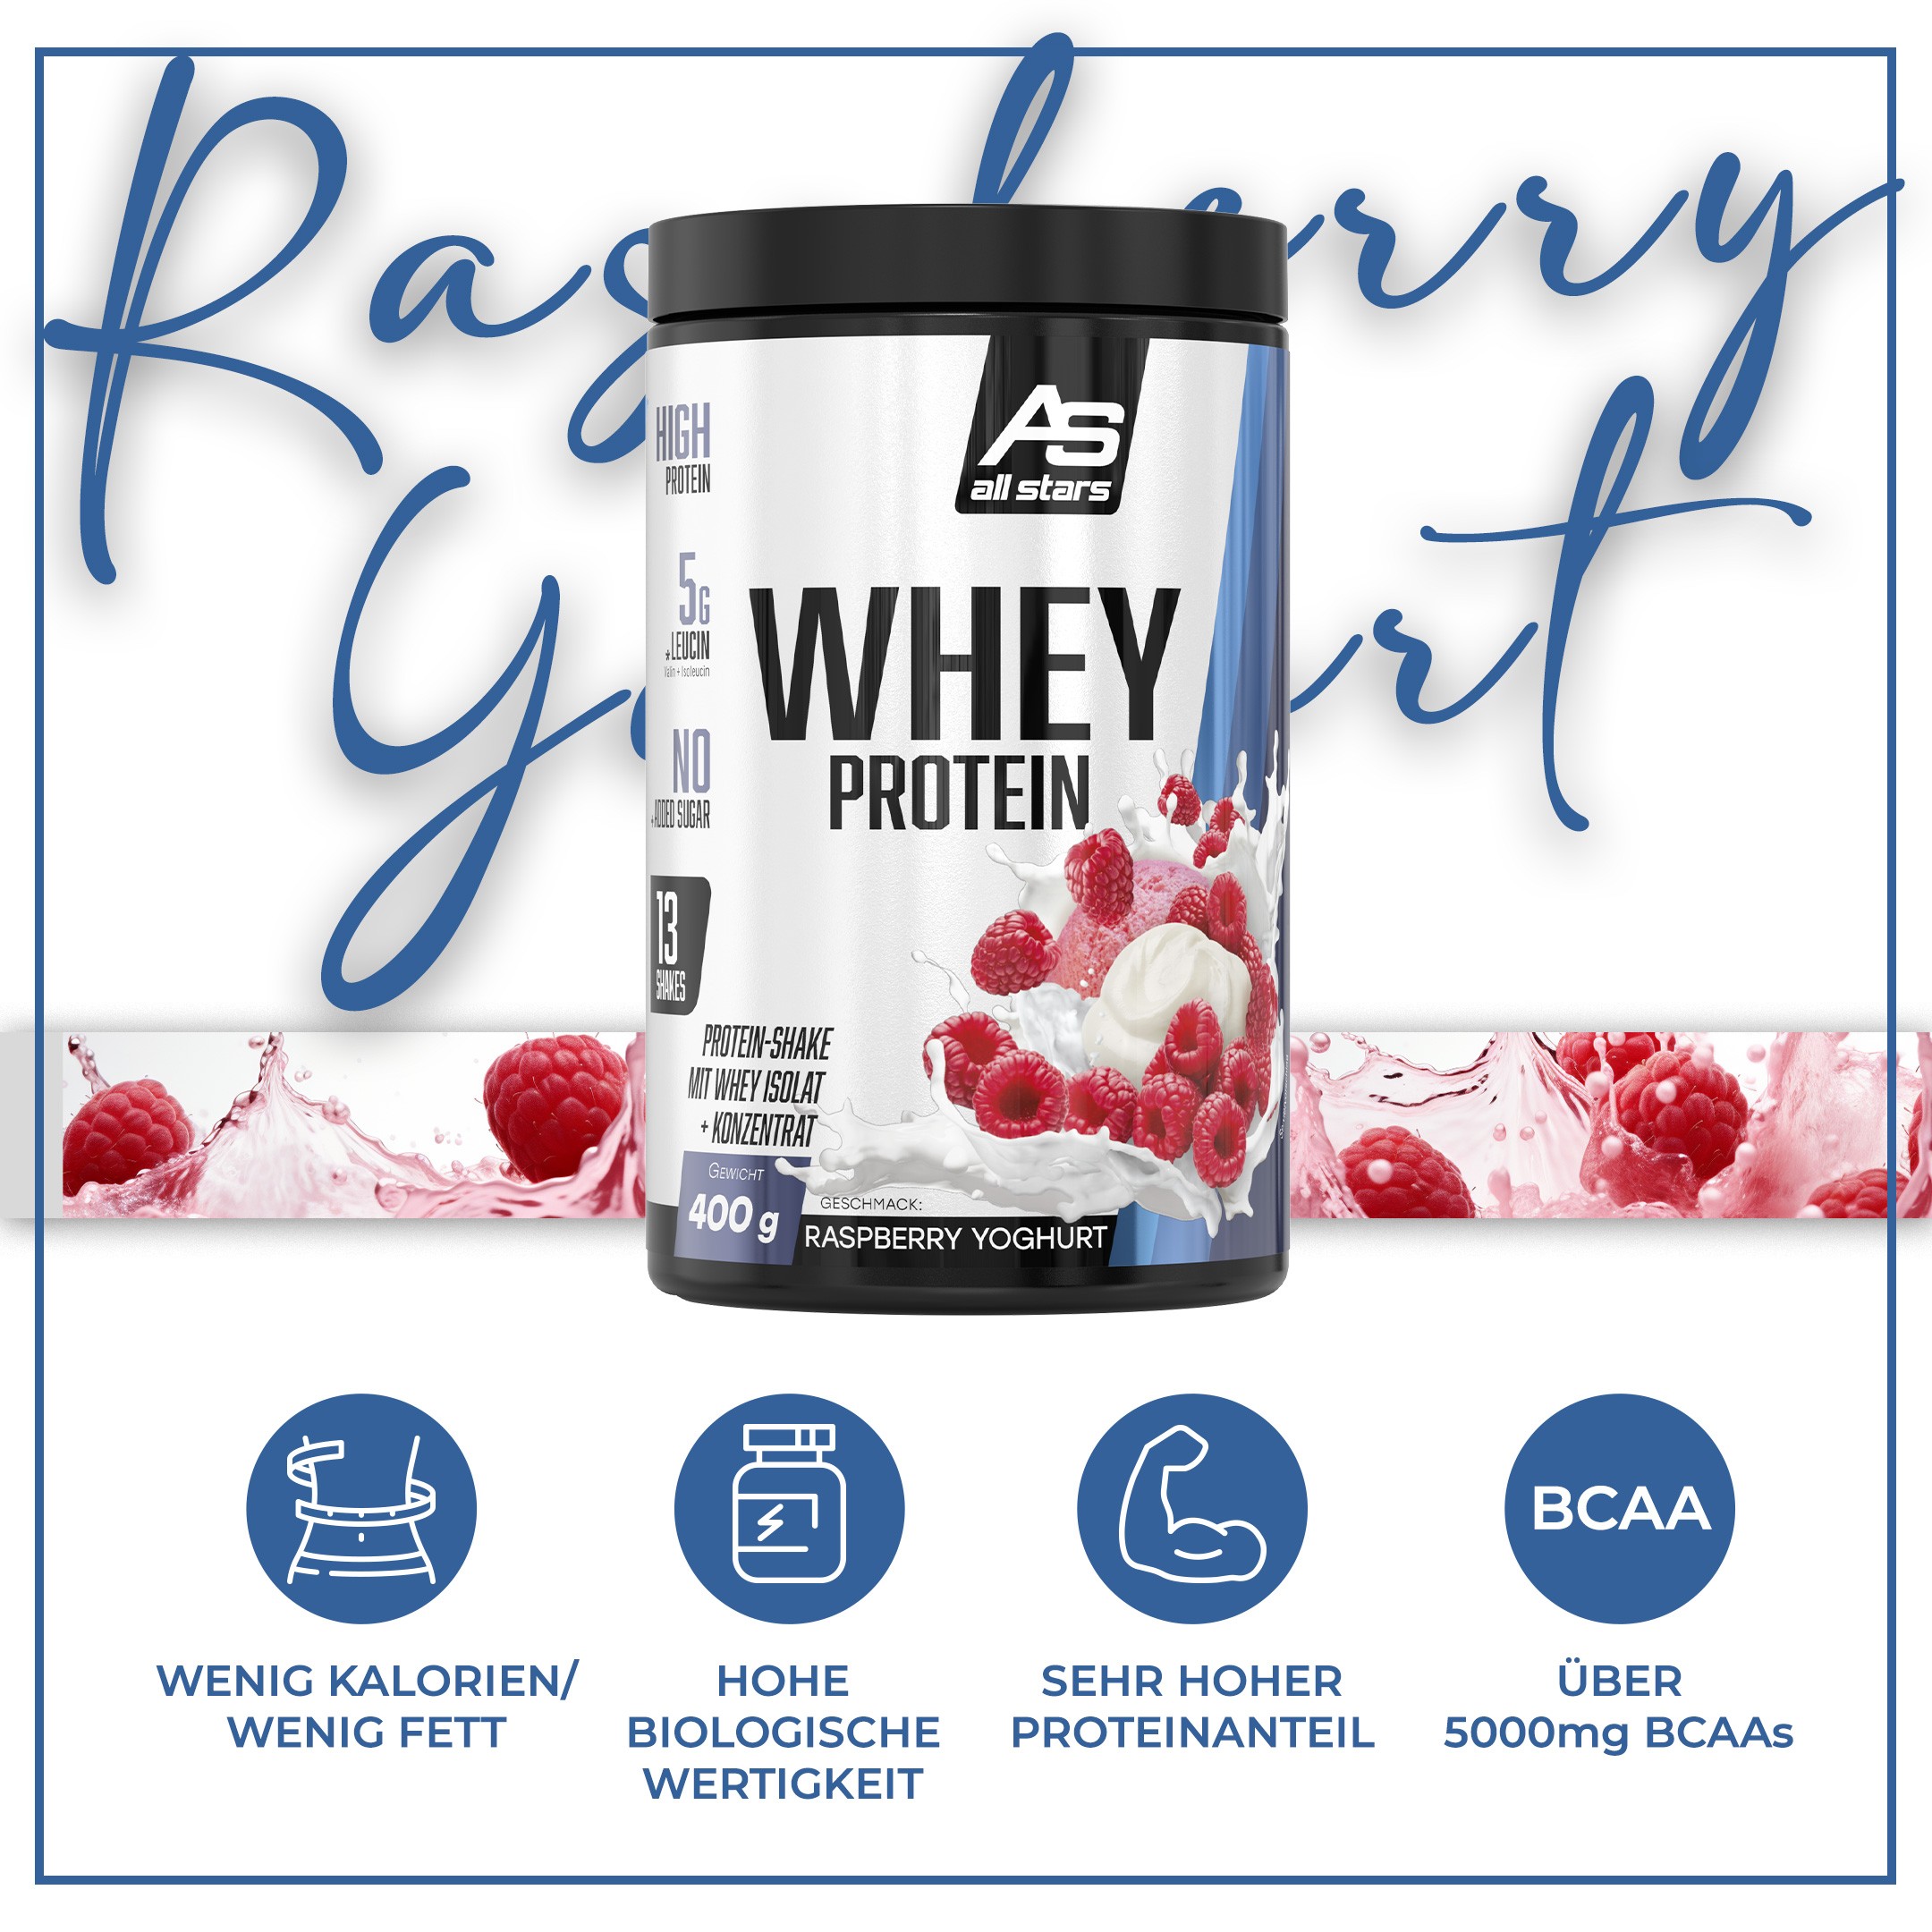 ALL STARS Whey Protein - 400g Dose